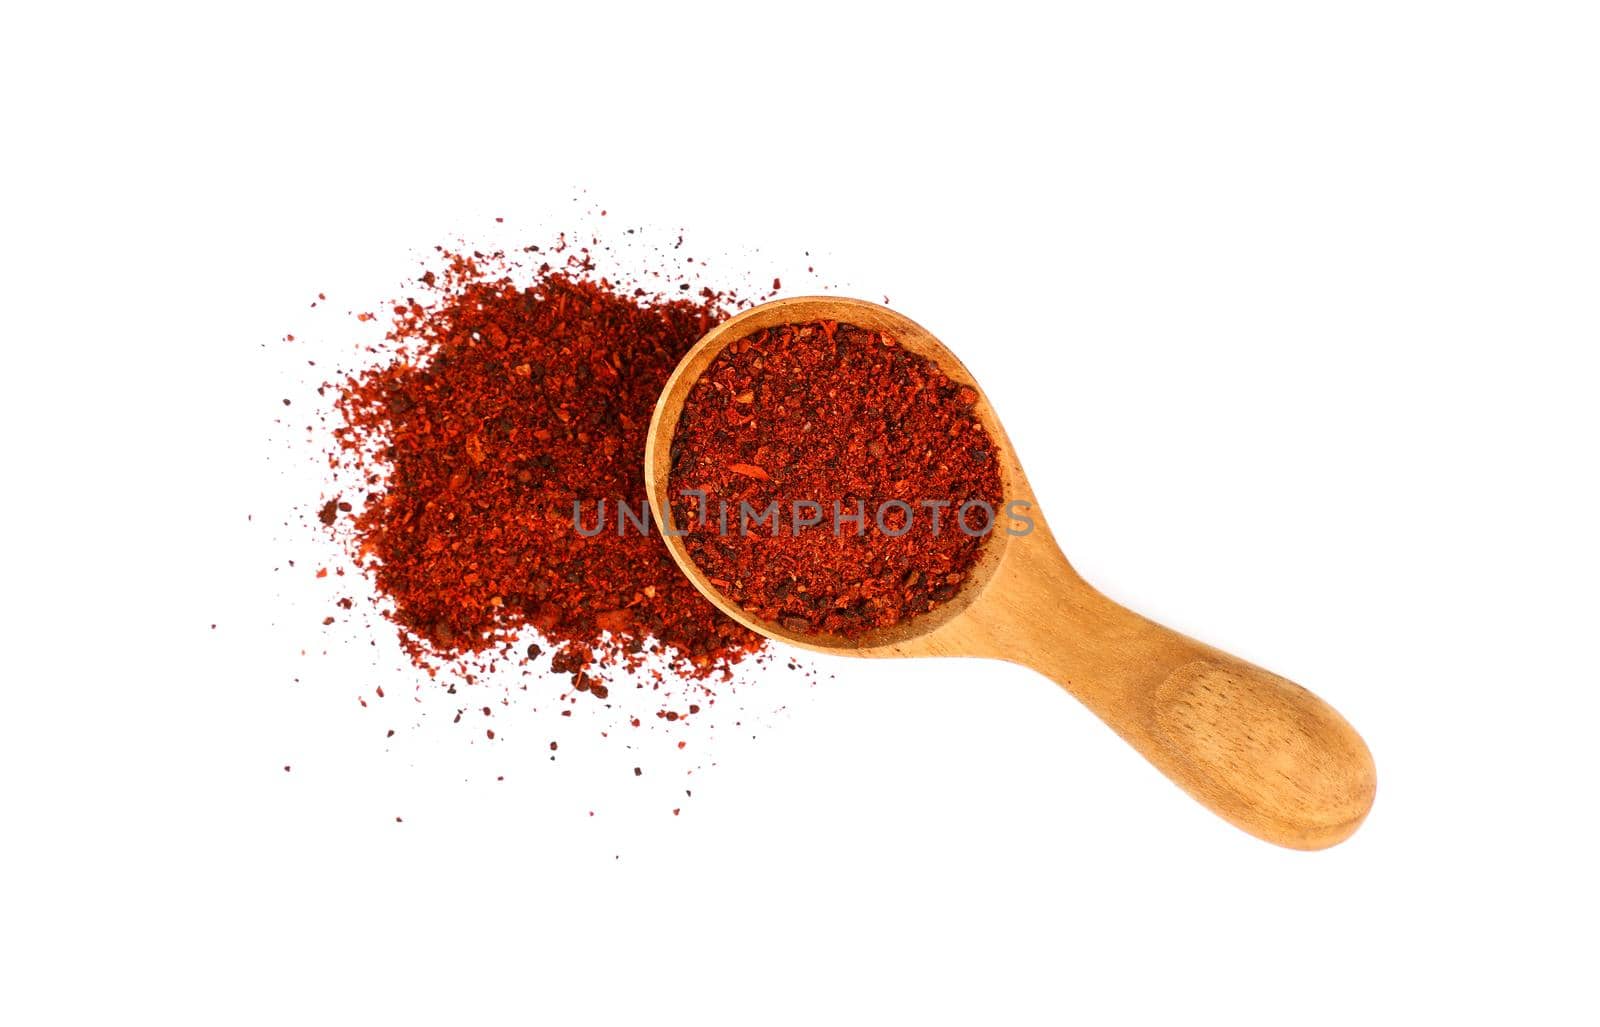 Close up one wooden scoop spoon full of ground sundried tomatoes, heap of powder spilled around, isolated on white background, elevated top view, directly above